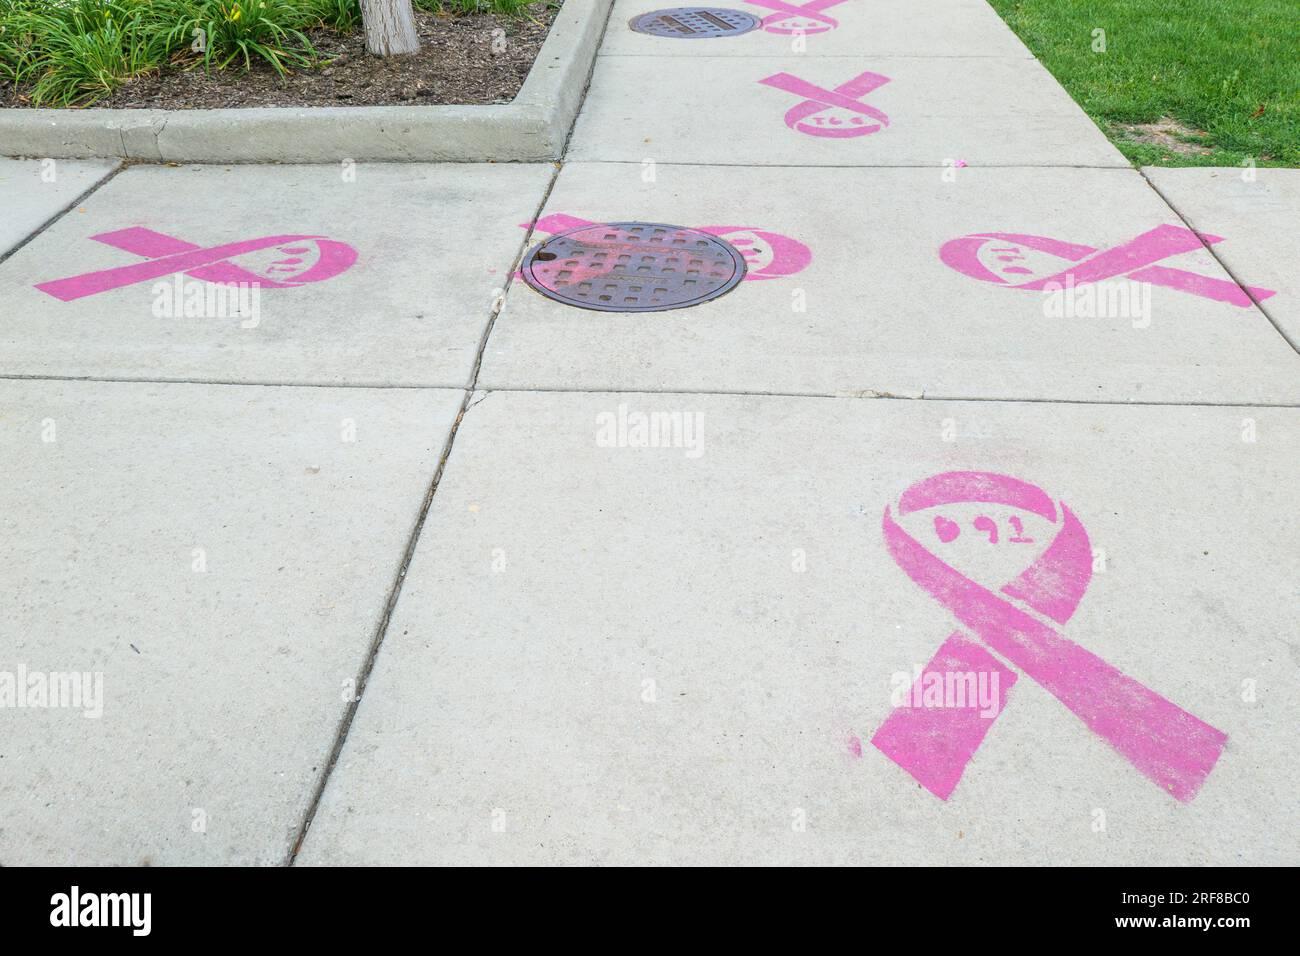 Breast cancer awareness pink ribbons painted on sidewalk. Forest Park, Illinois. Stock Photo